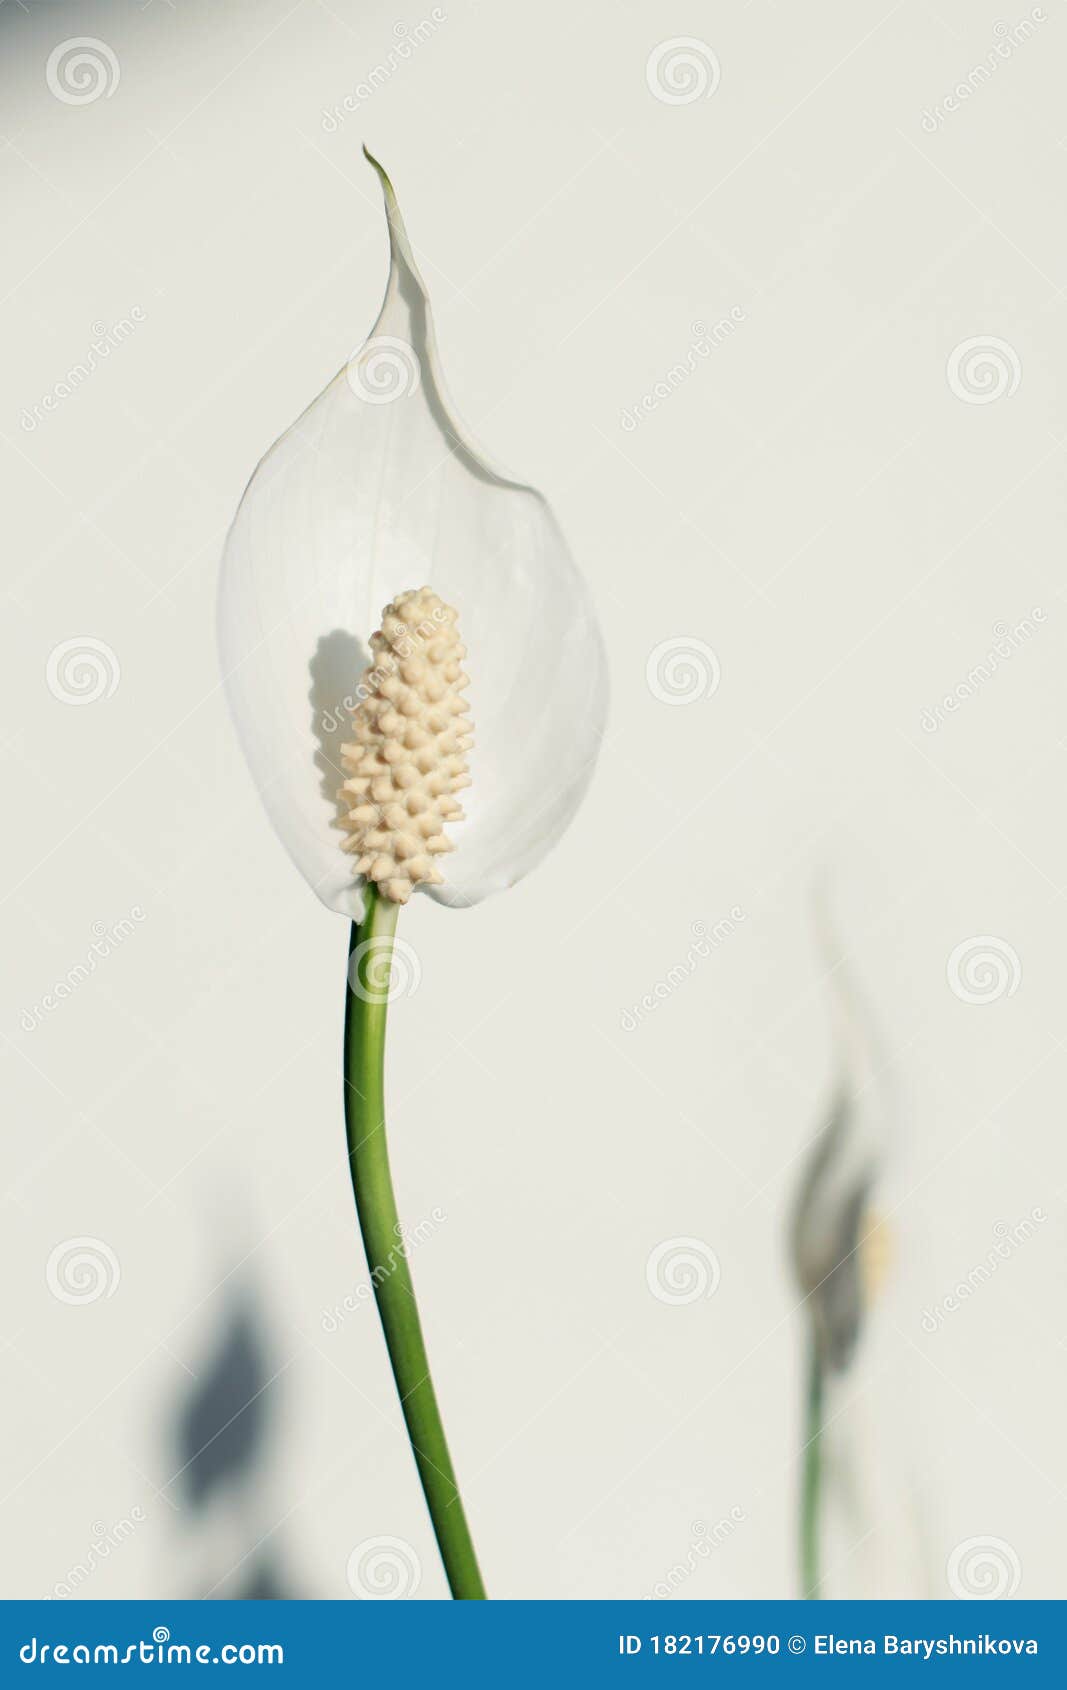 Popular Air Purifying Indoor Plant With White Flowers Spathiphyllum Commonly Known As Spath Or Peace Lily Stock Photo Image Of Lily Houseplant 182176990